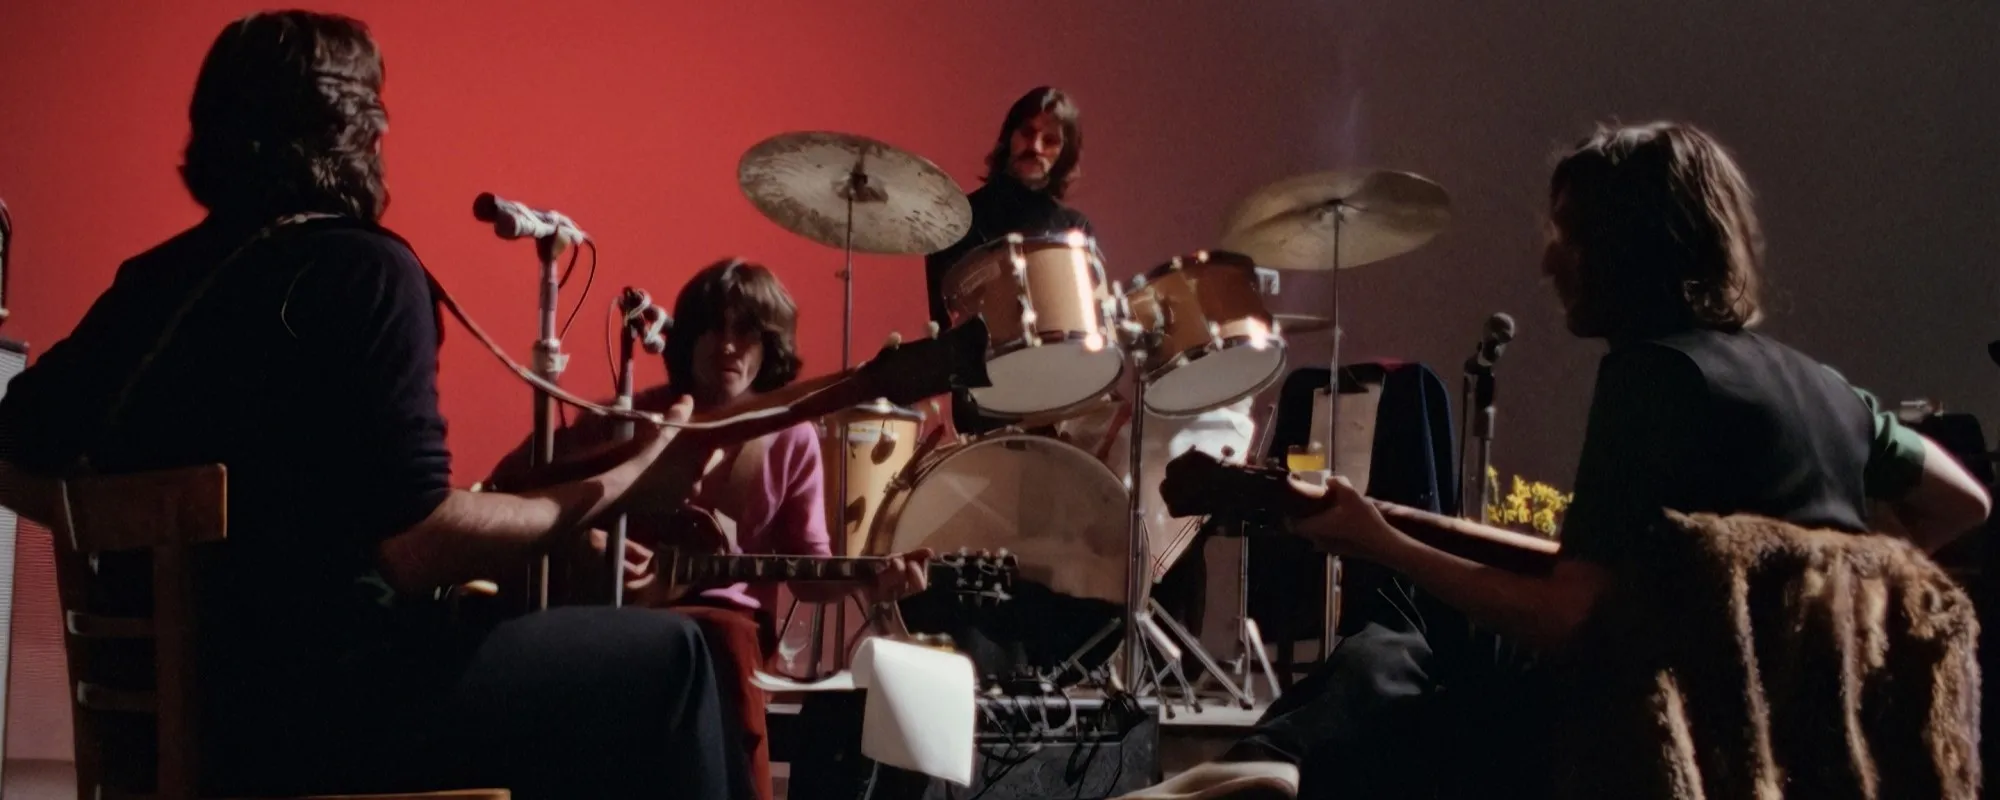 Ringo Starr Says There’s “Not a Lot of Joy” in The Beatles’ ‘Let It Be’ Film, Except for That Rooftop Concert